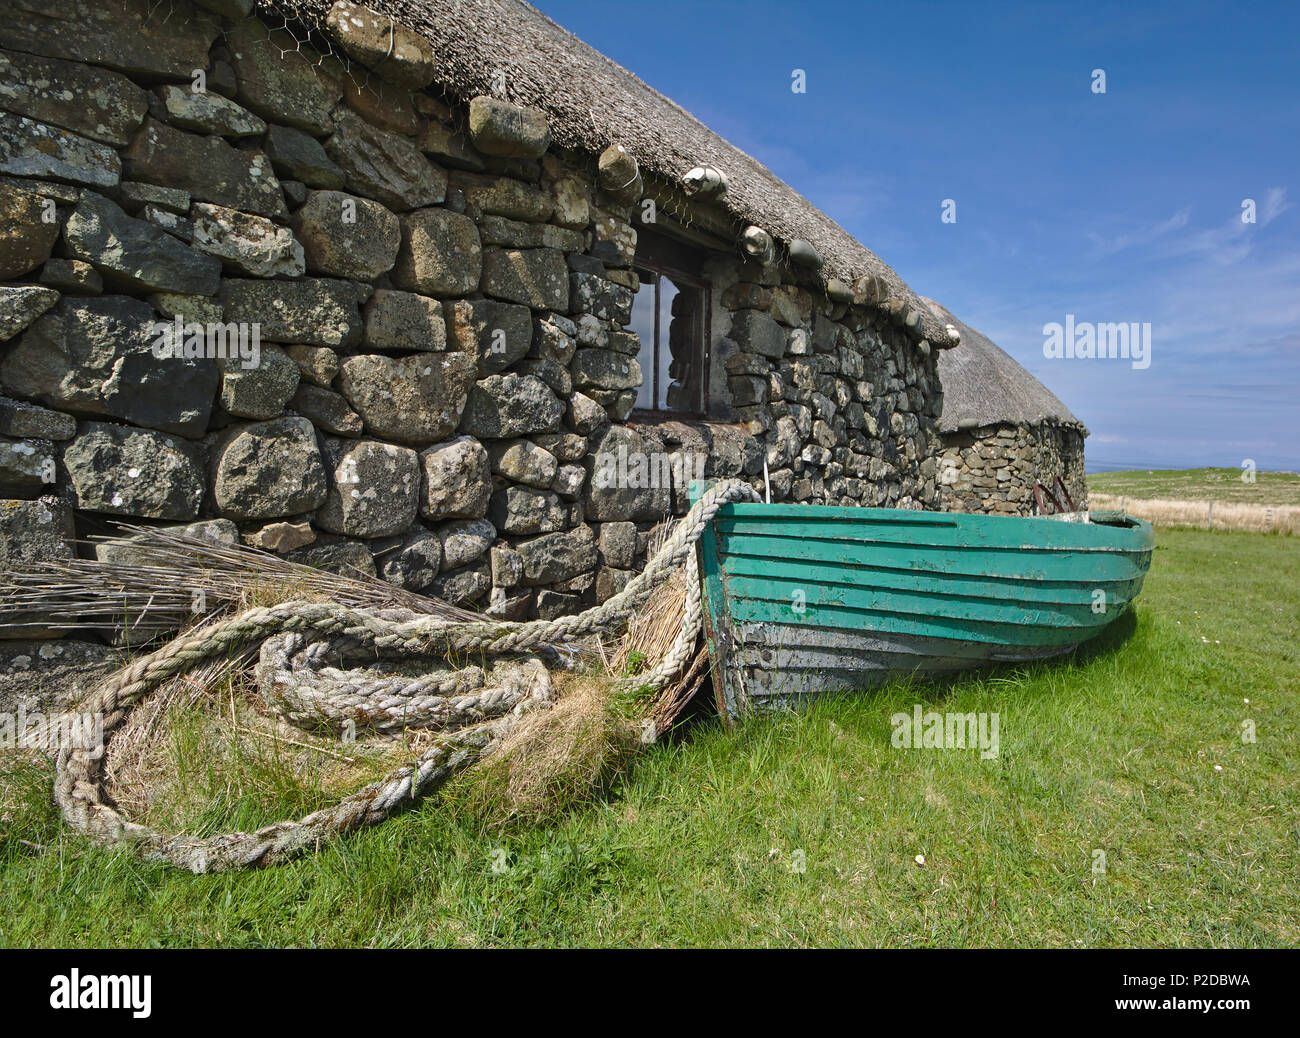 Traditional Hebridean blackhouse with thatched roof, wooden fishing boat and coiled rope. Stock Photo